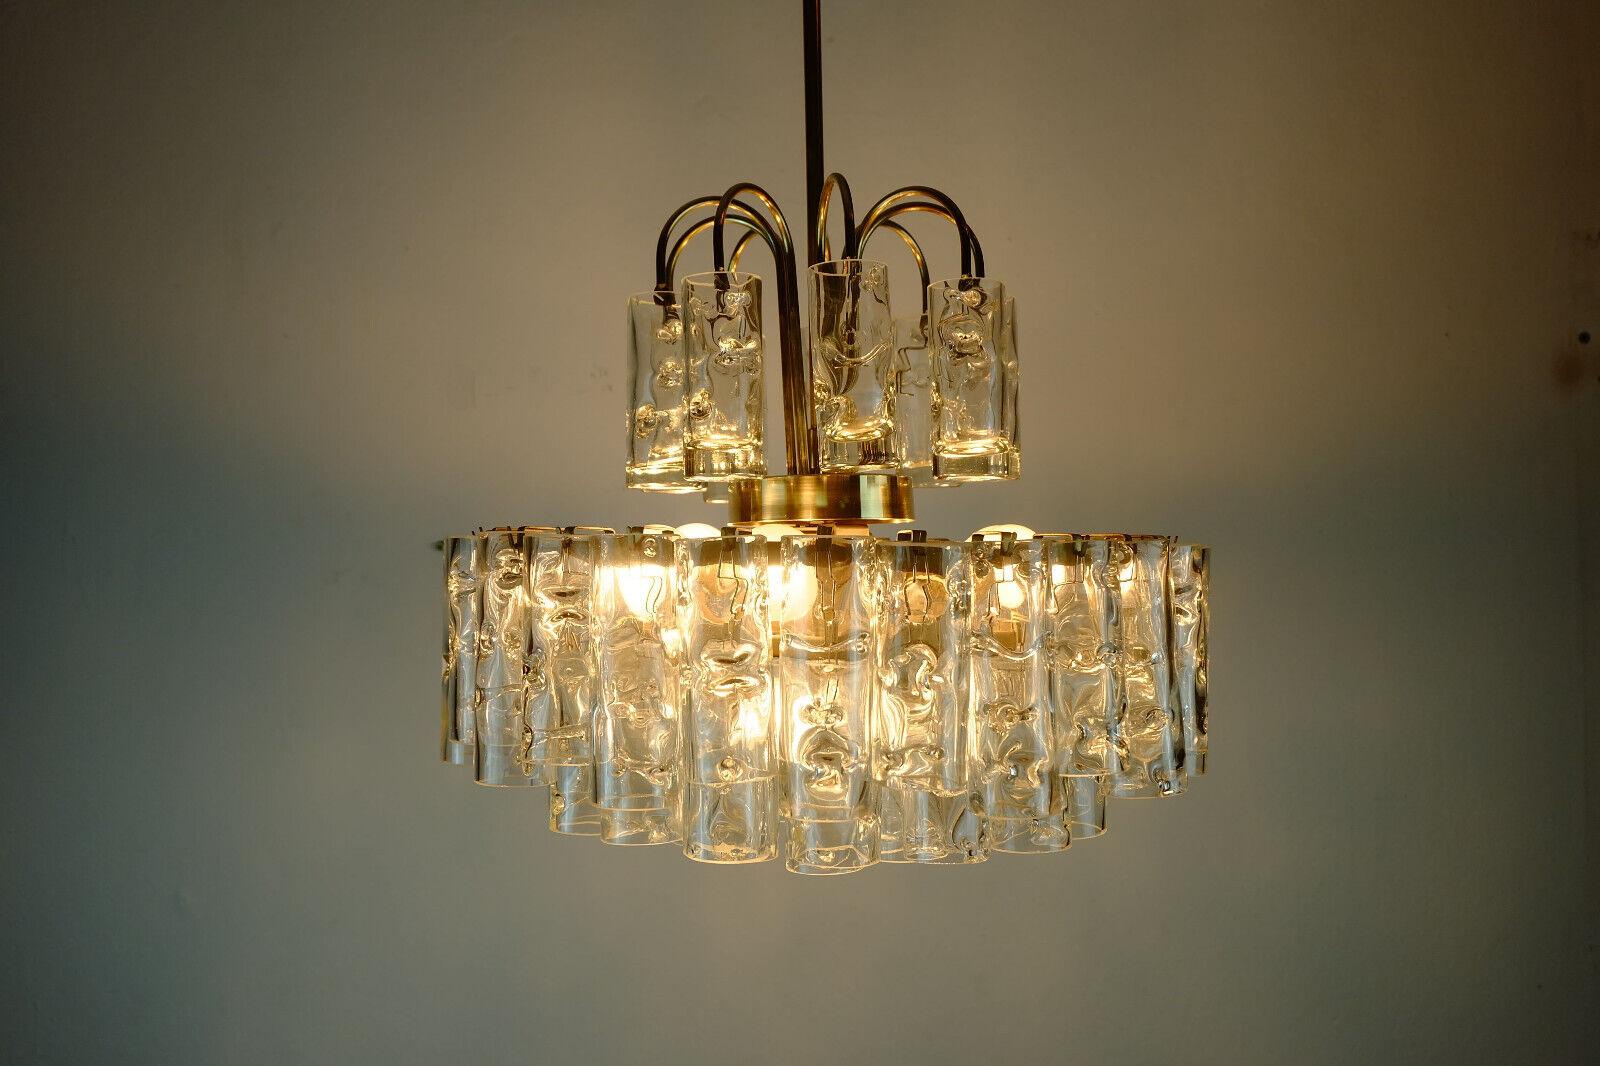 German 4-Tier Doria Chandelier with 62 Glass Tubes Ice Glass Structured Glass, 1960s For Sale